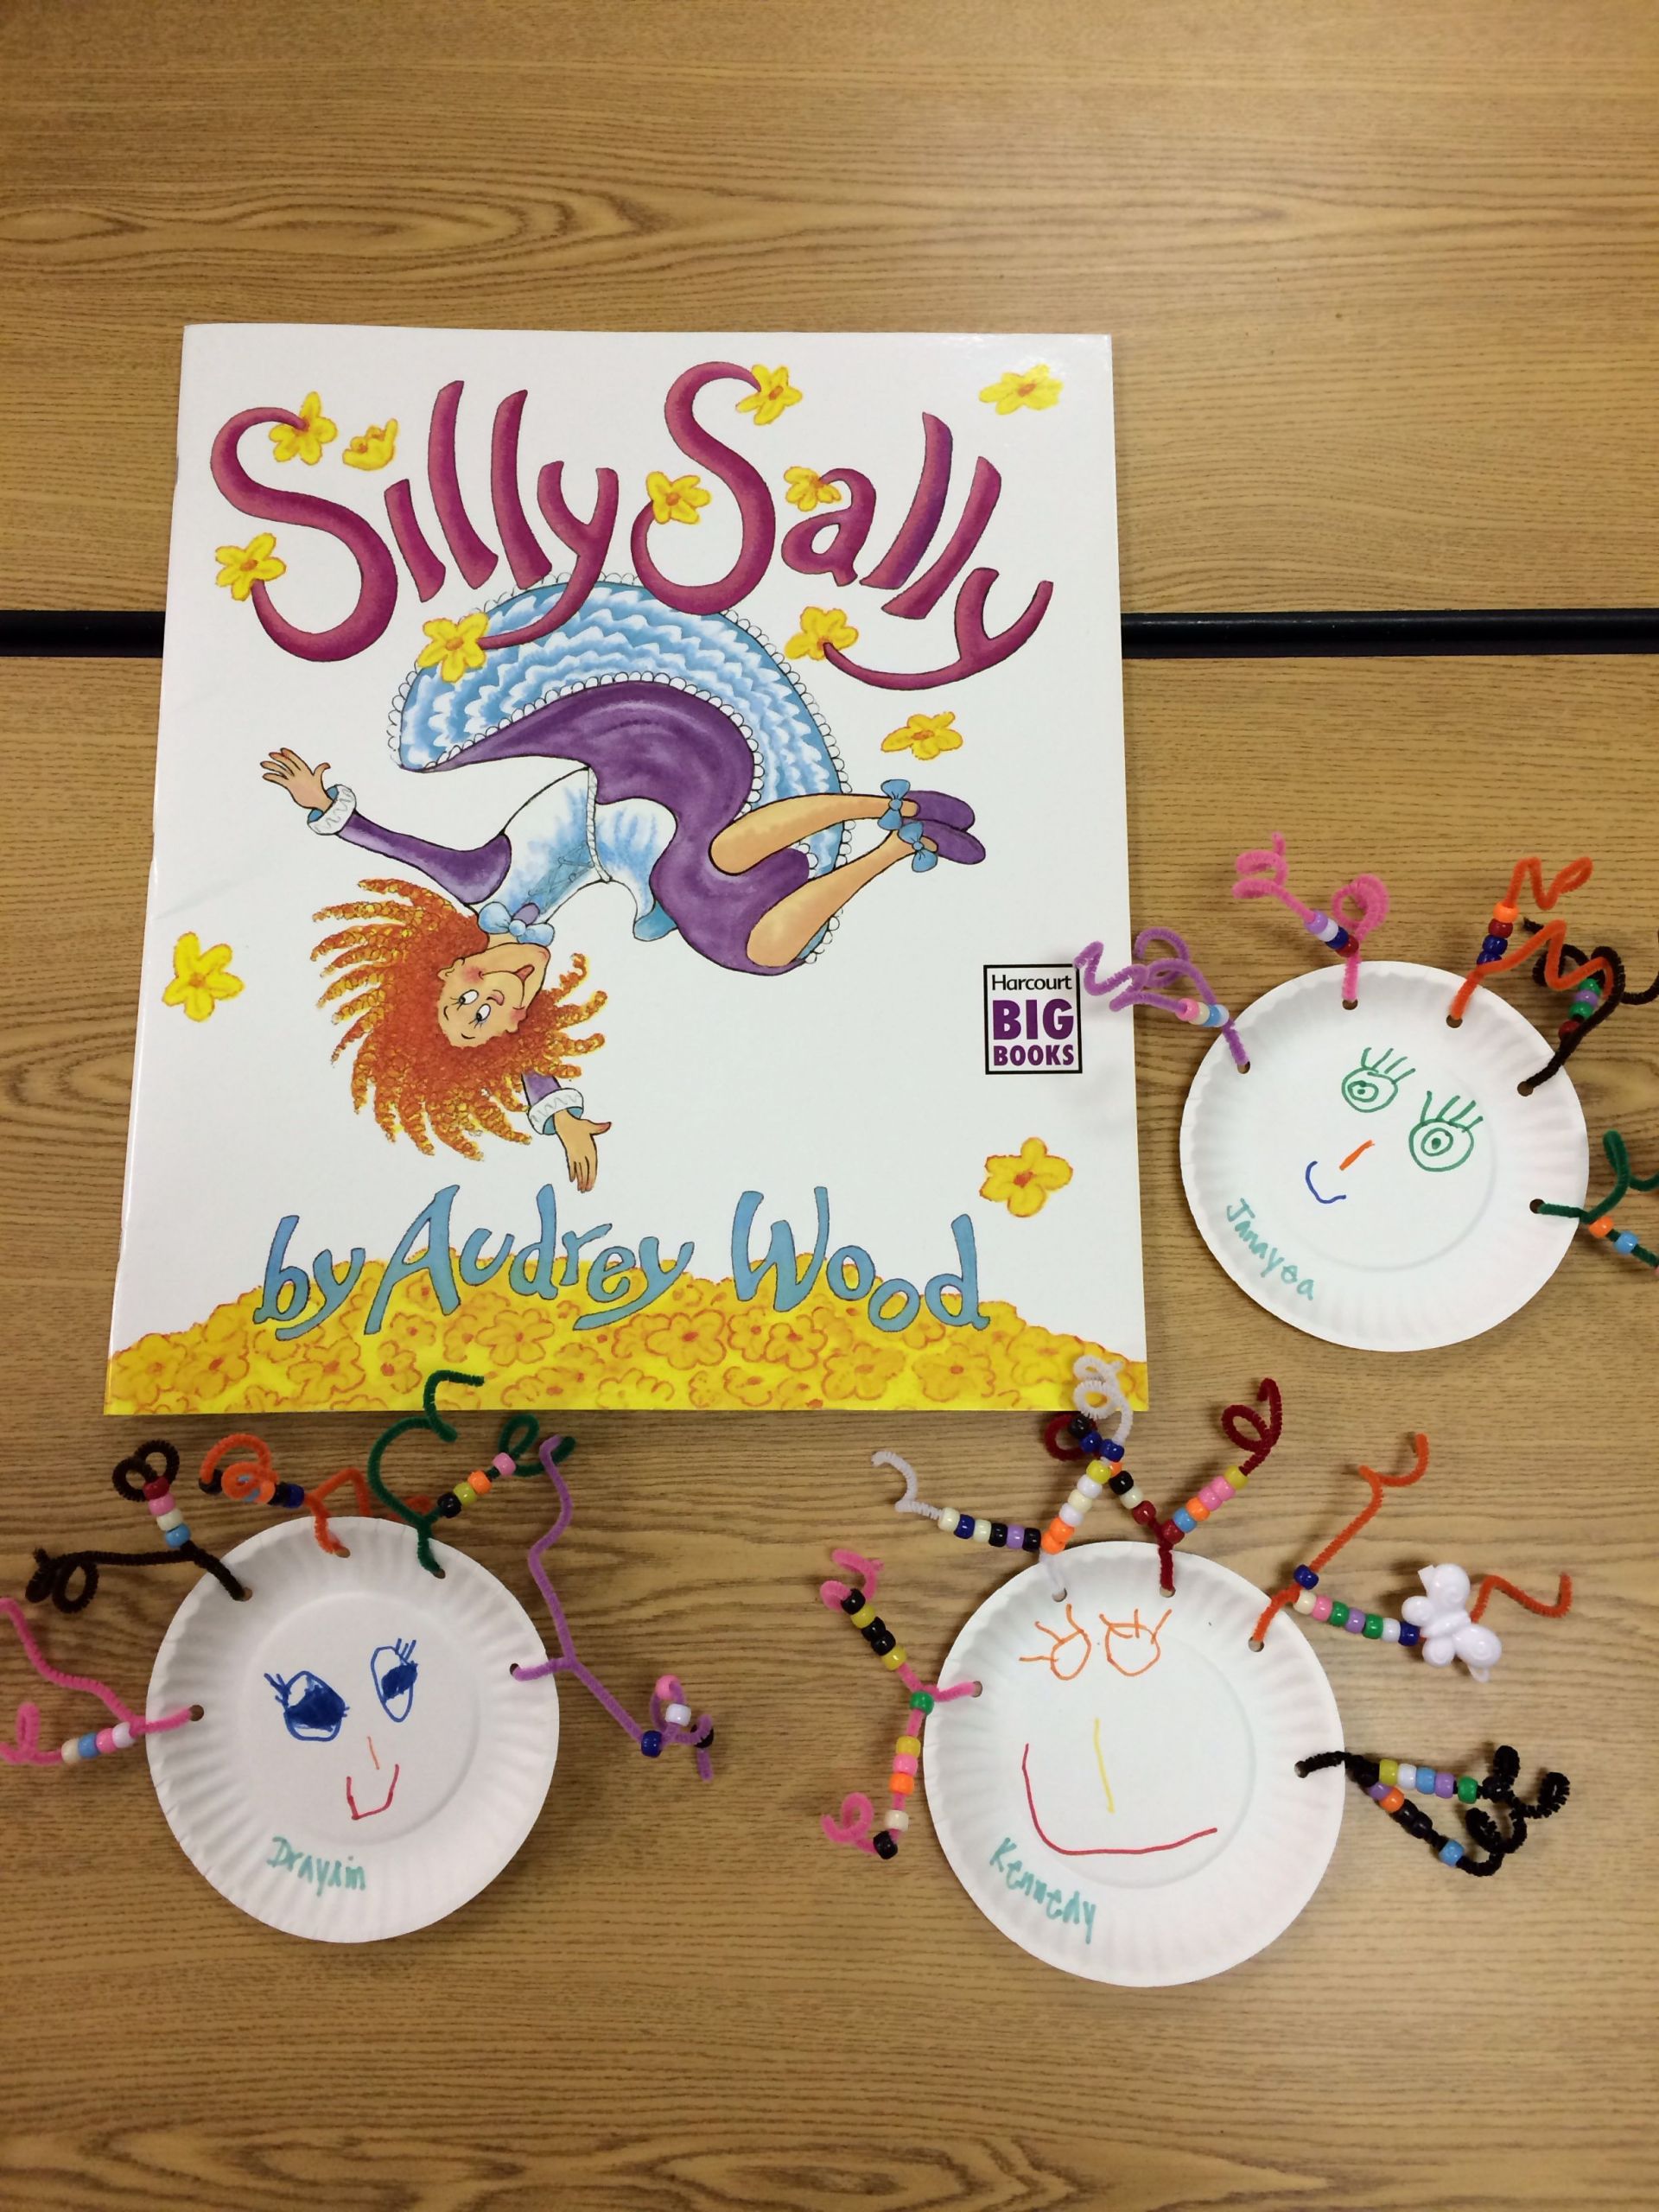 Arts And Crafts Activities For Preschoolers
 Silly Sally preschool art project